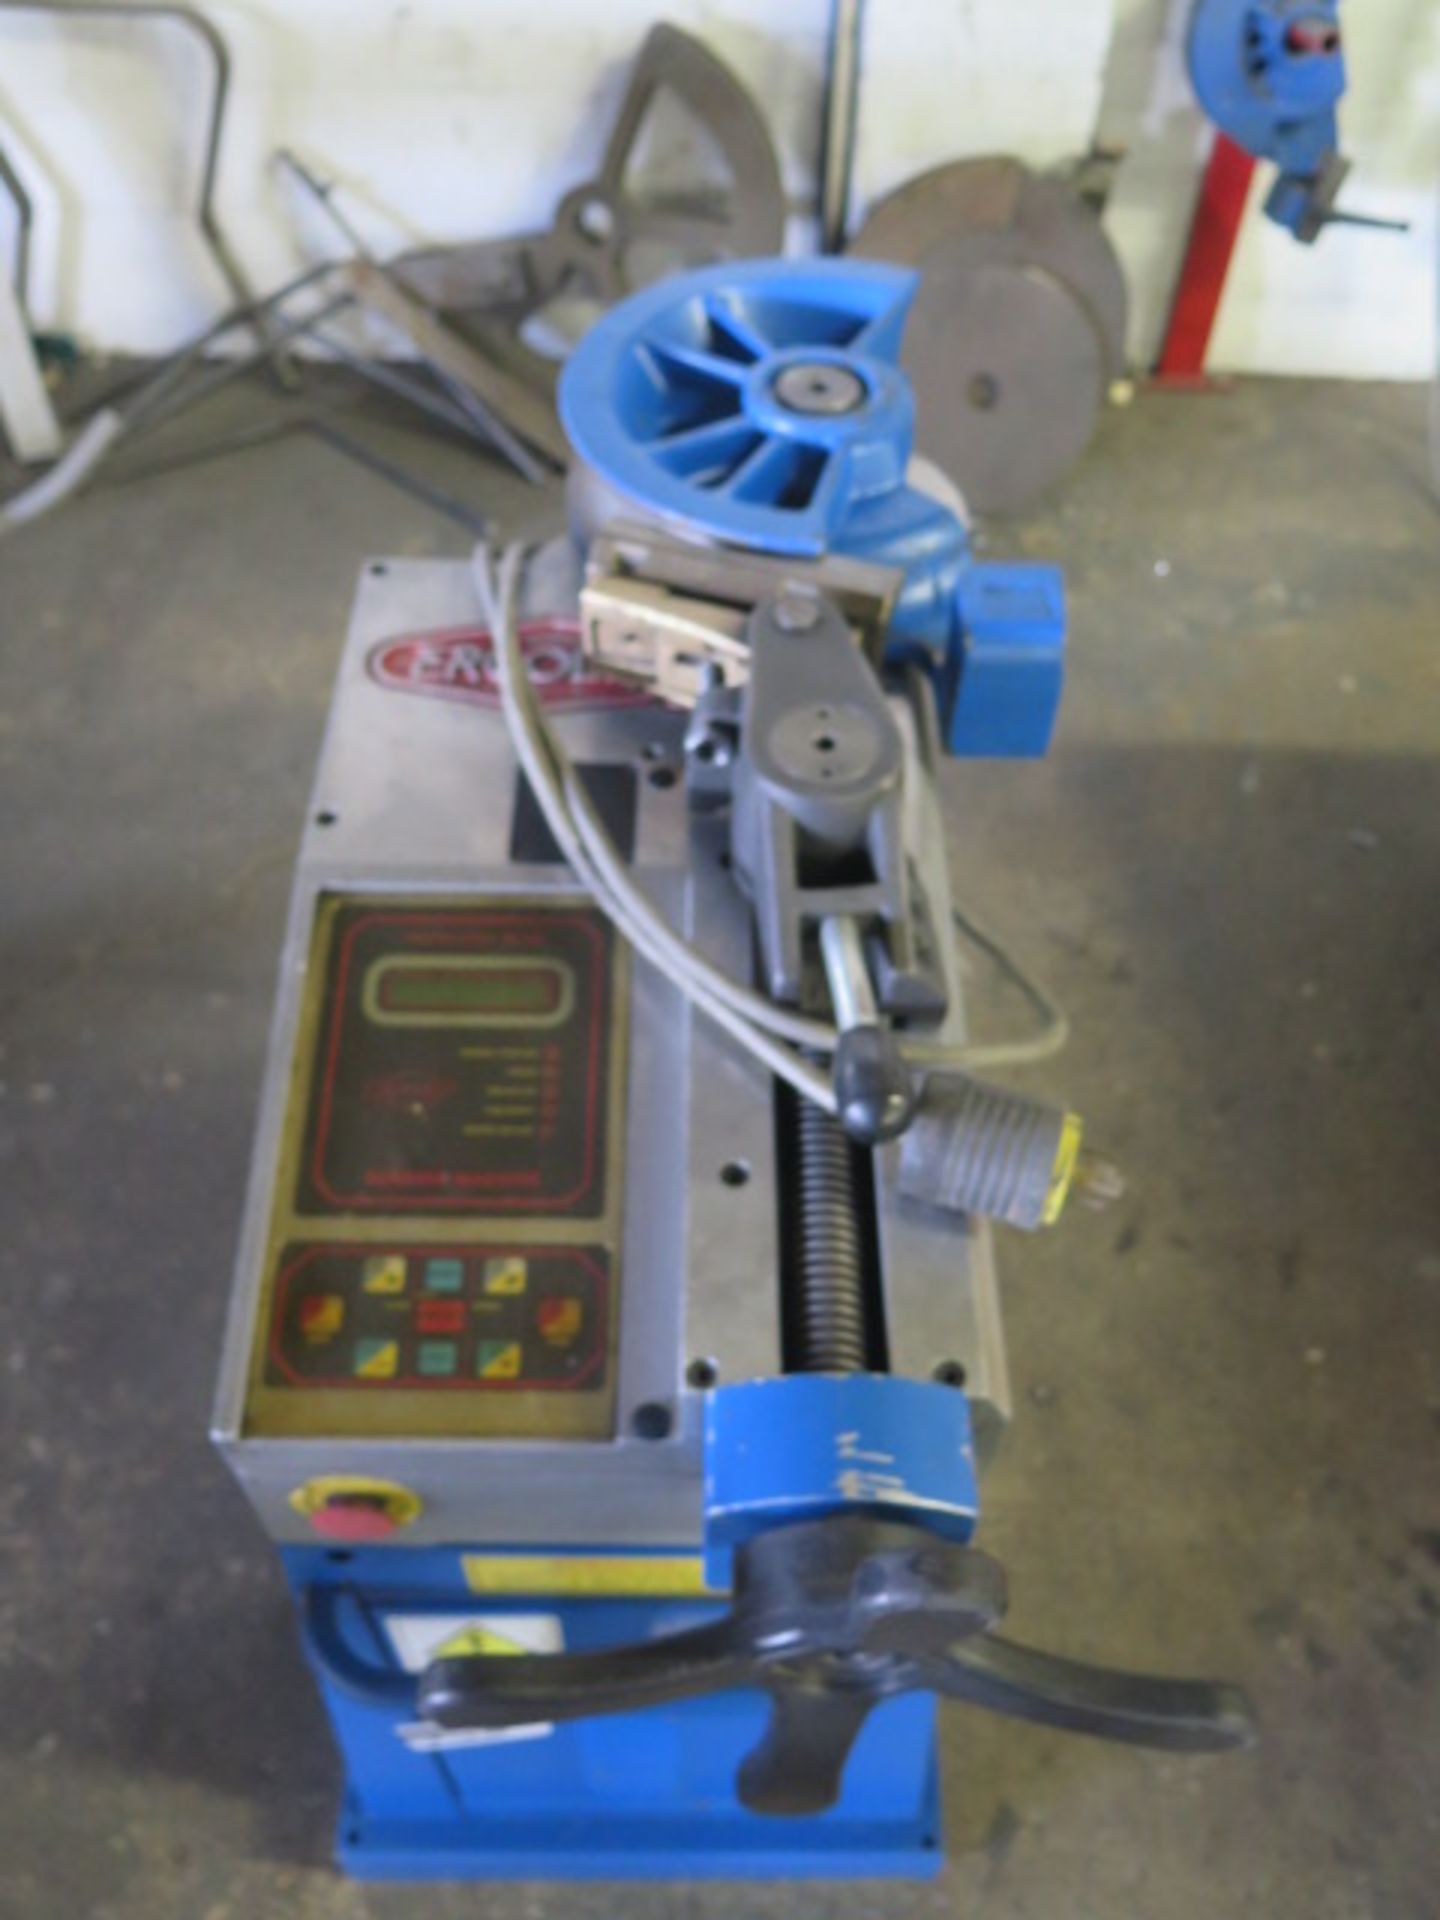 2004 CML / Ercolina Type 030-TRIF Hydraulic Tube Bender s/n 3040303 w/ TB-100 Controls, 2 ½” Cap - Image 3 of 9